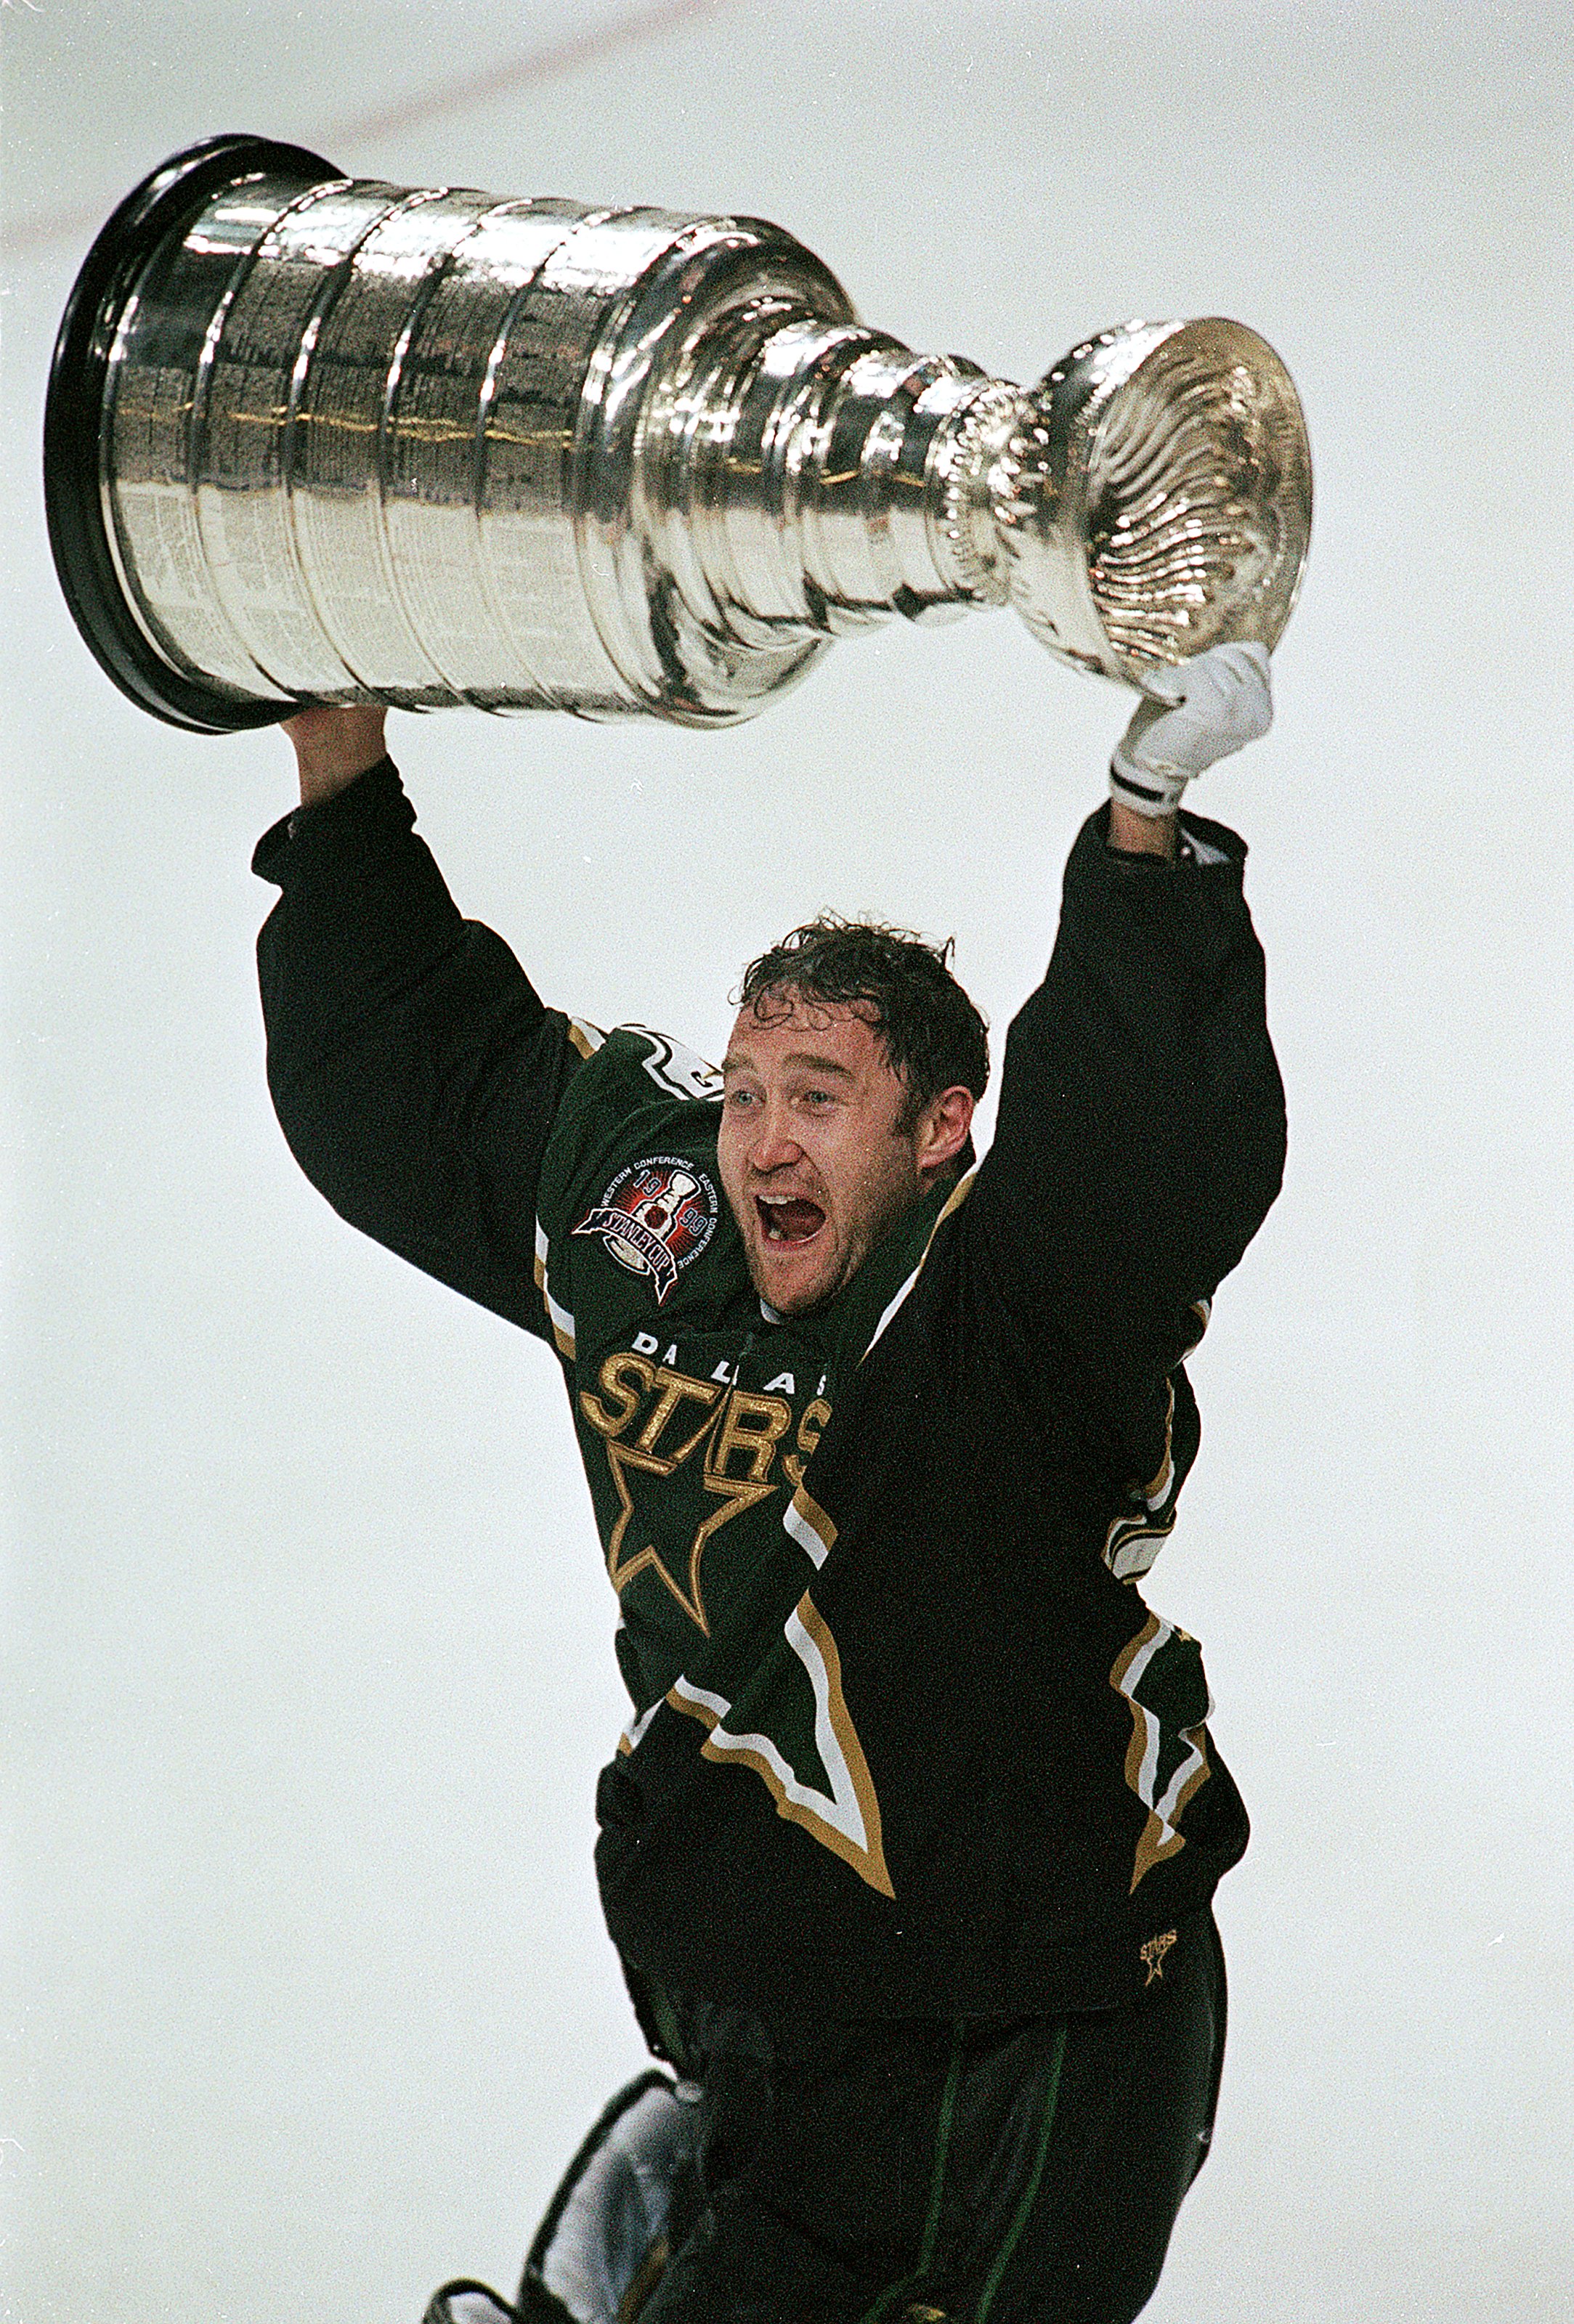 19 Jul 1999: Ed Belfour #20 of the Dallas Stars celebrates as he carries the Stanely Cup on the ice after the Stanley Cup Game against the Buffalo Sabres at the Marine Midland Arena in Buffalo, New York. The Stars defeated the Sabres 2-1 in the third over